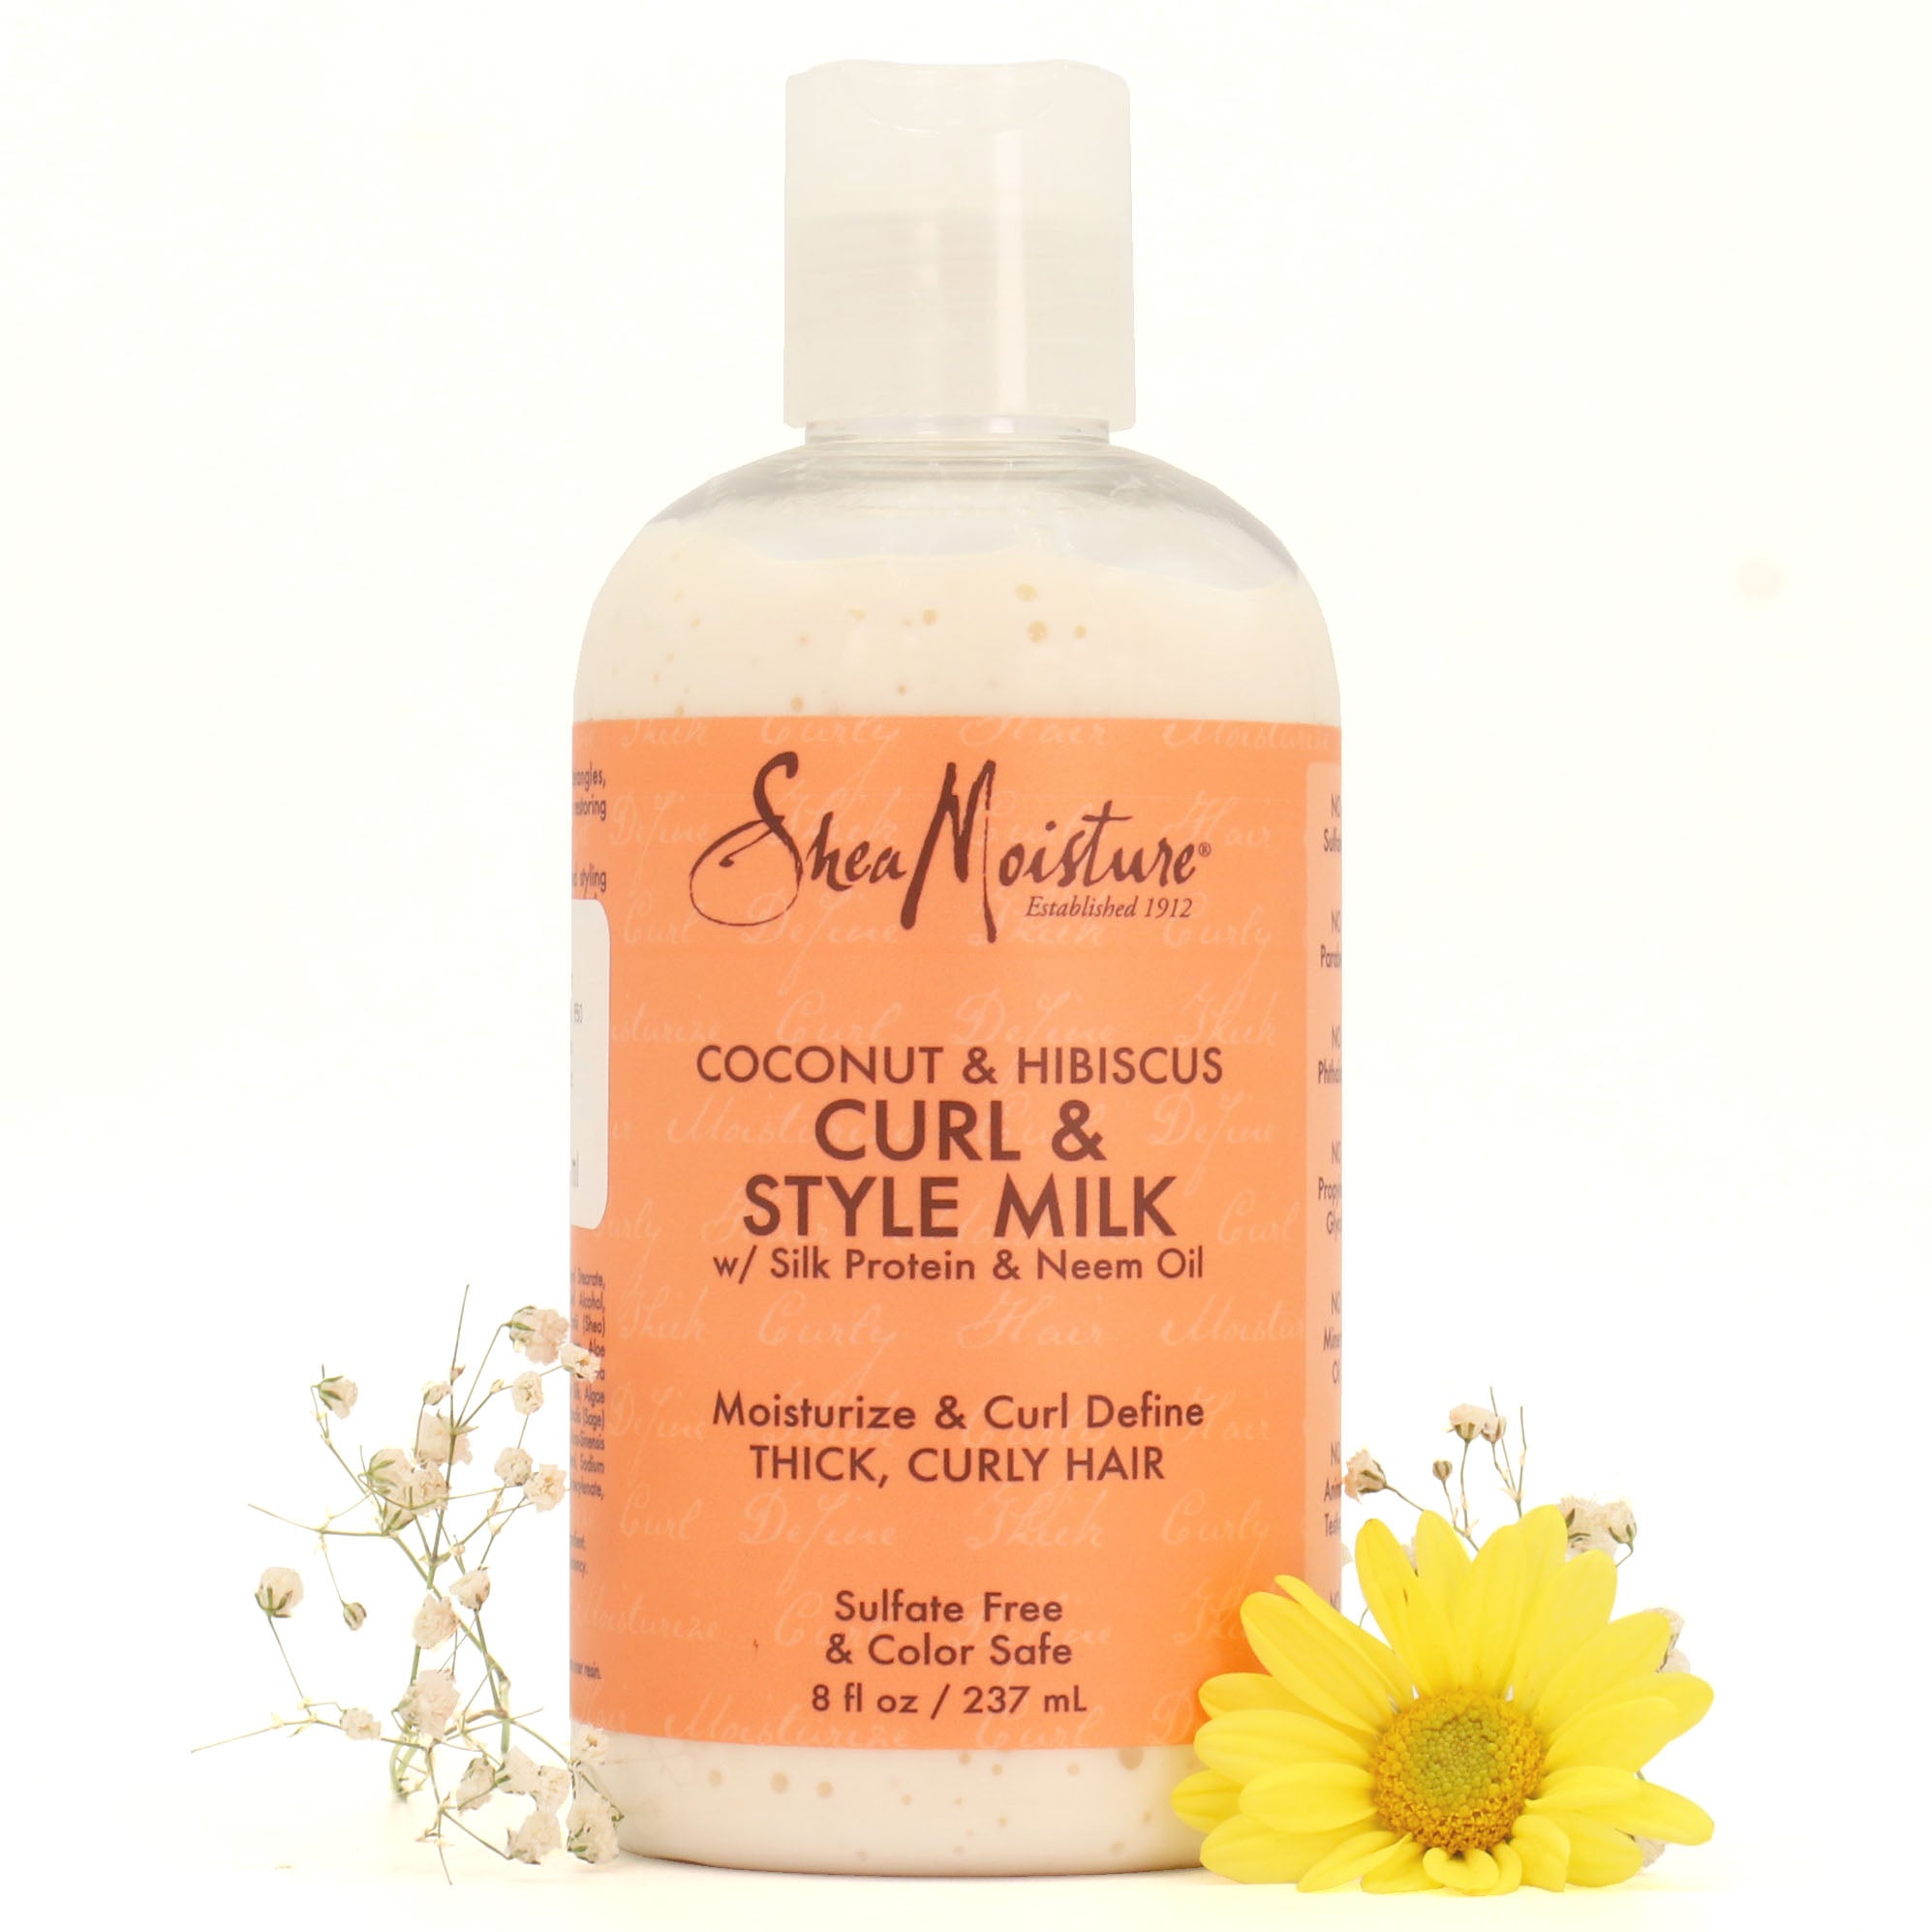 CURL & STYLE MILK COCONUT AND HIBISCUS